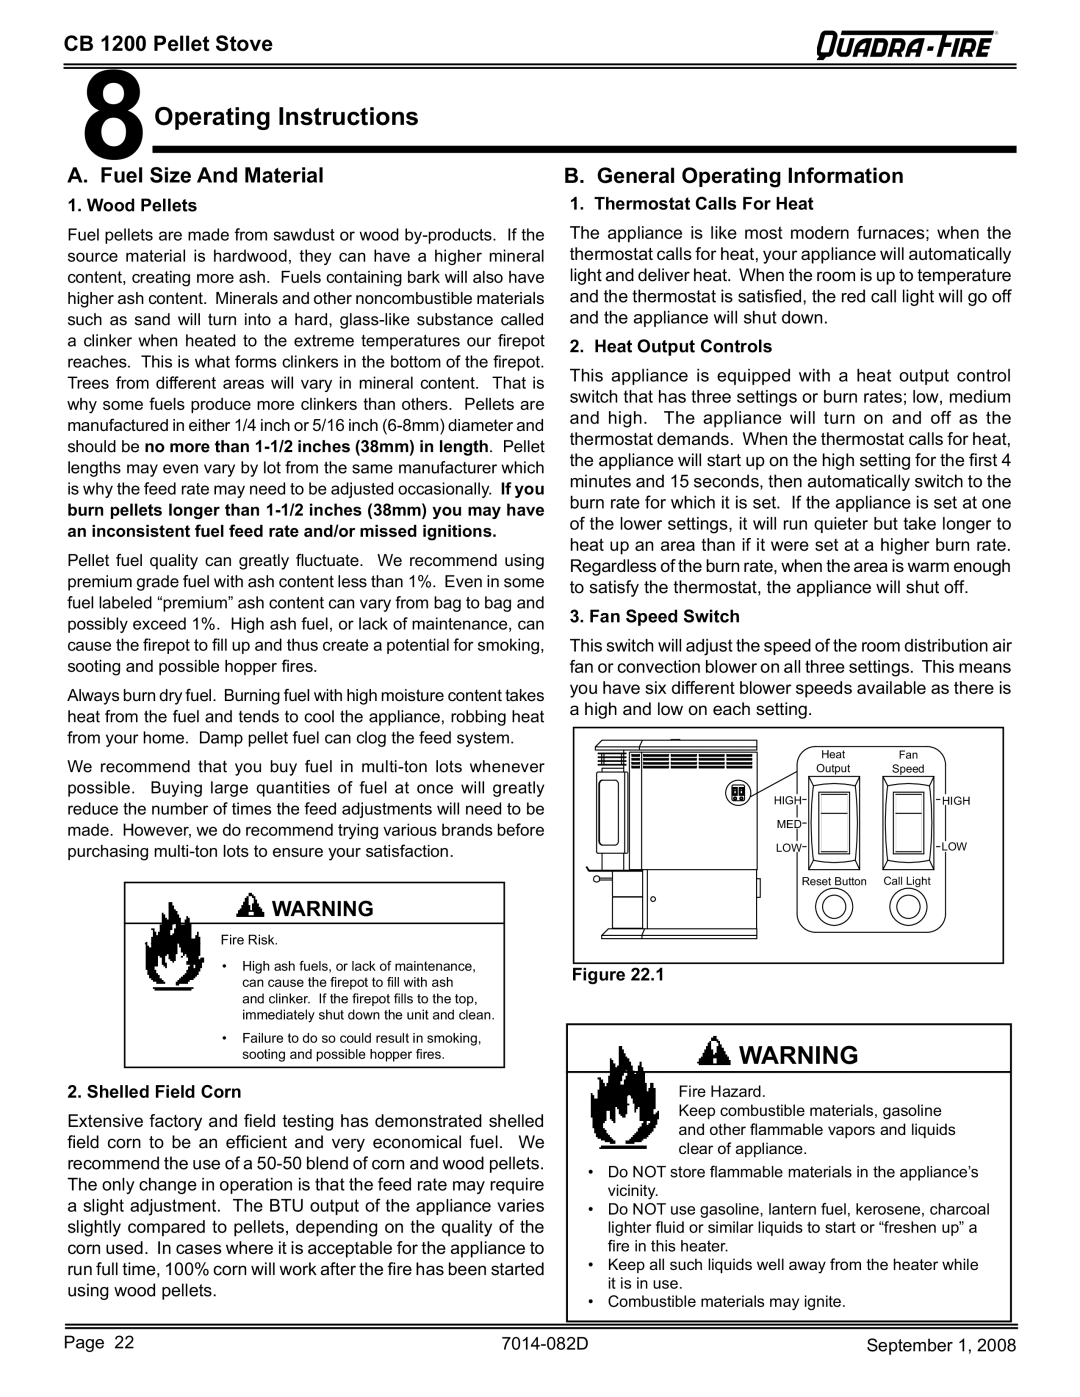 Hearth and Home Technologies CB1200-B 8Operating Instructions, Fuel Size And Material General Operating Information 